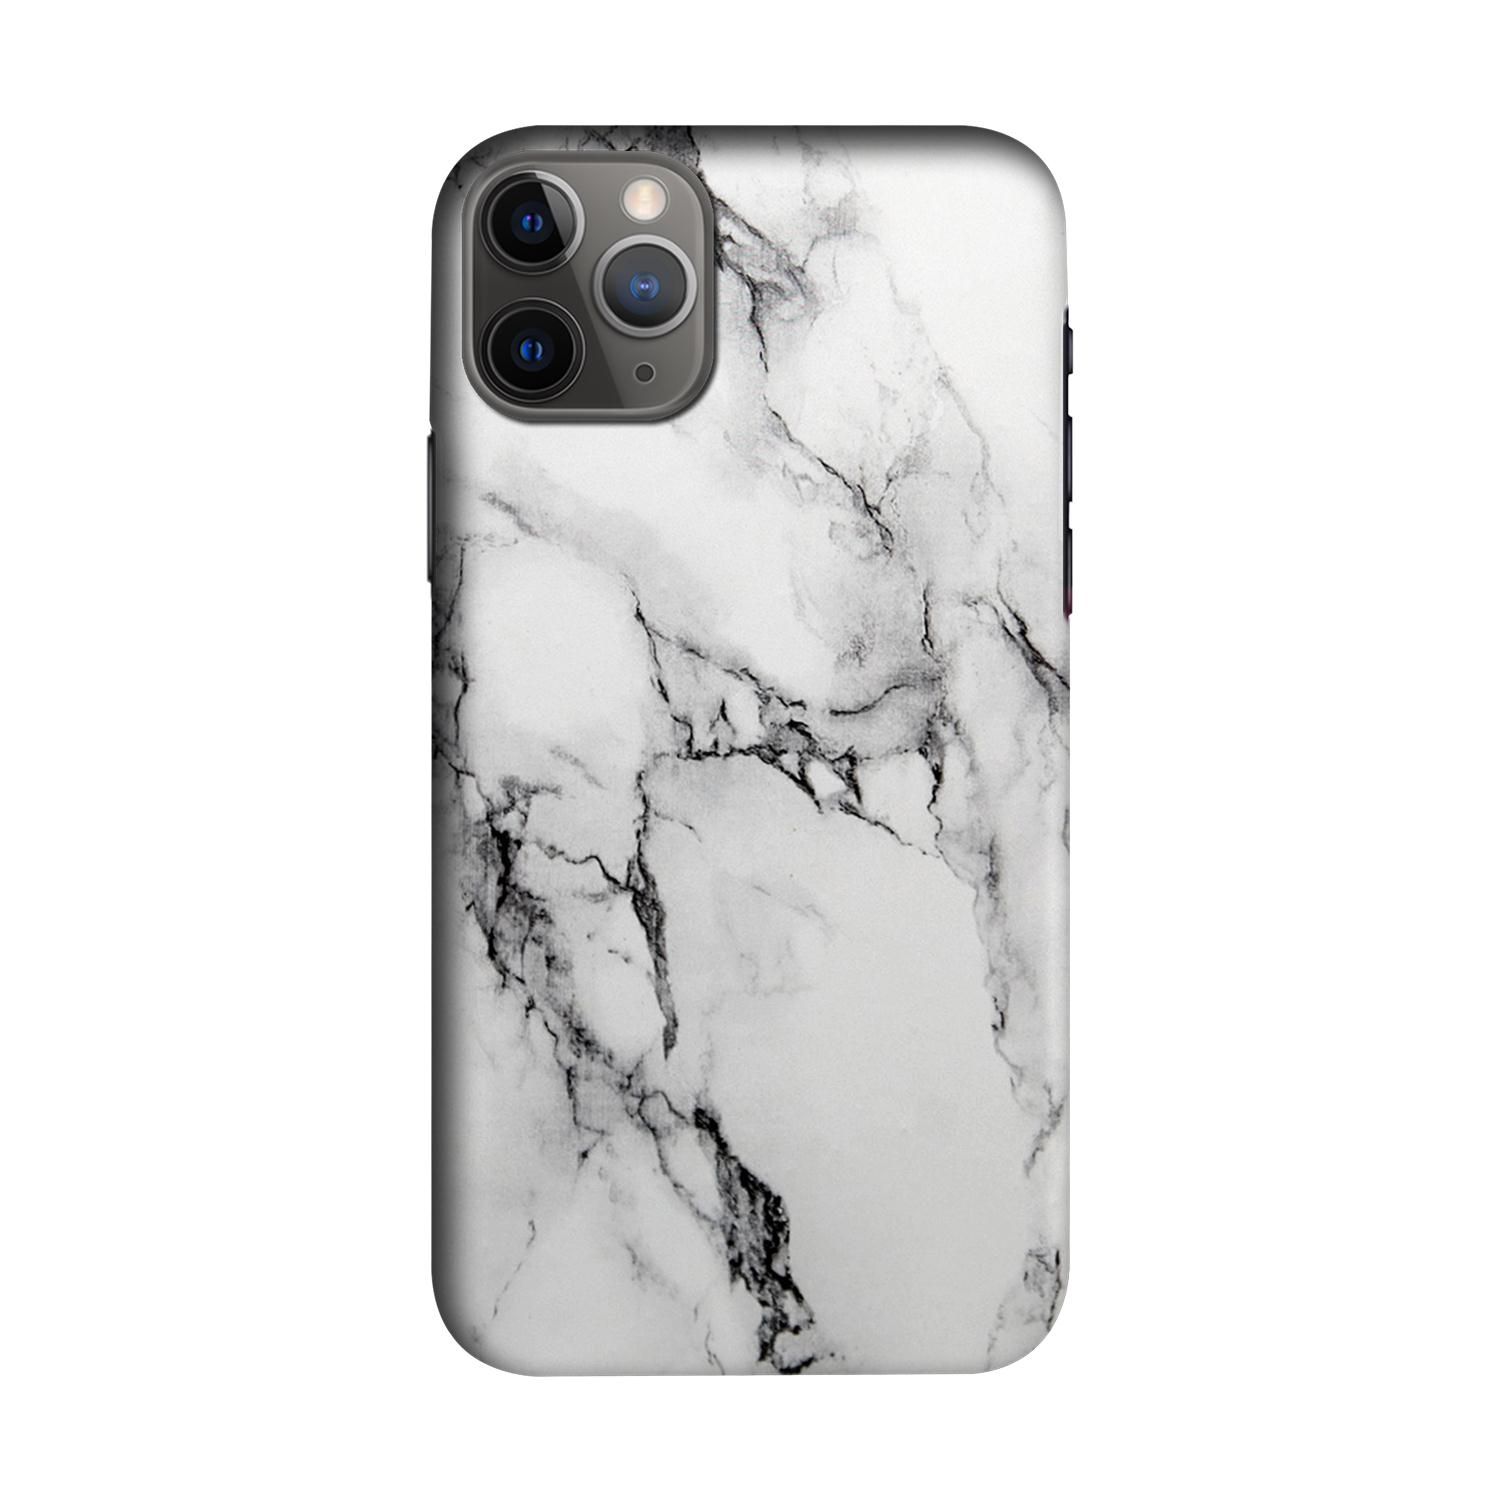 Buy Marble White Luna - Sleek Phone Case for iPhone 11 Pro Max Online